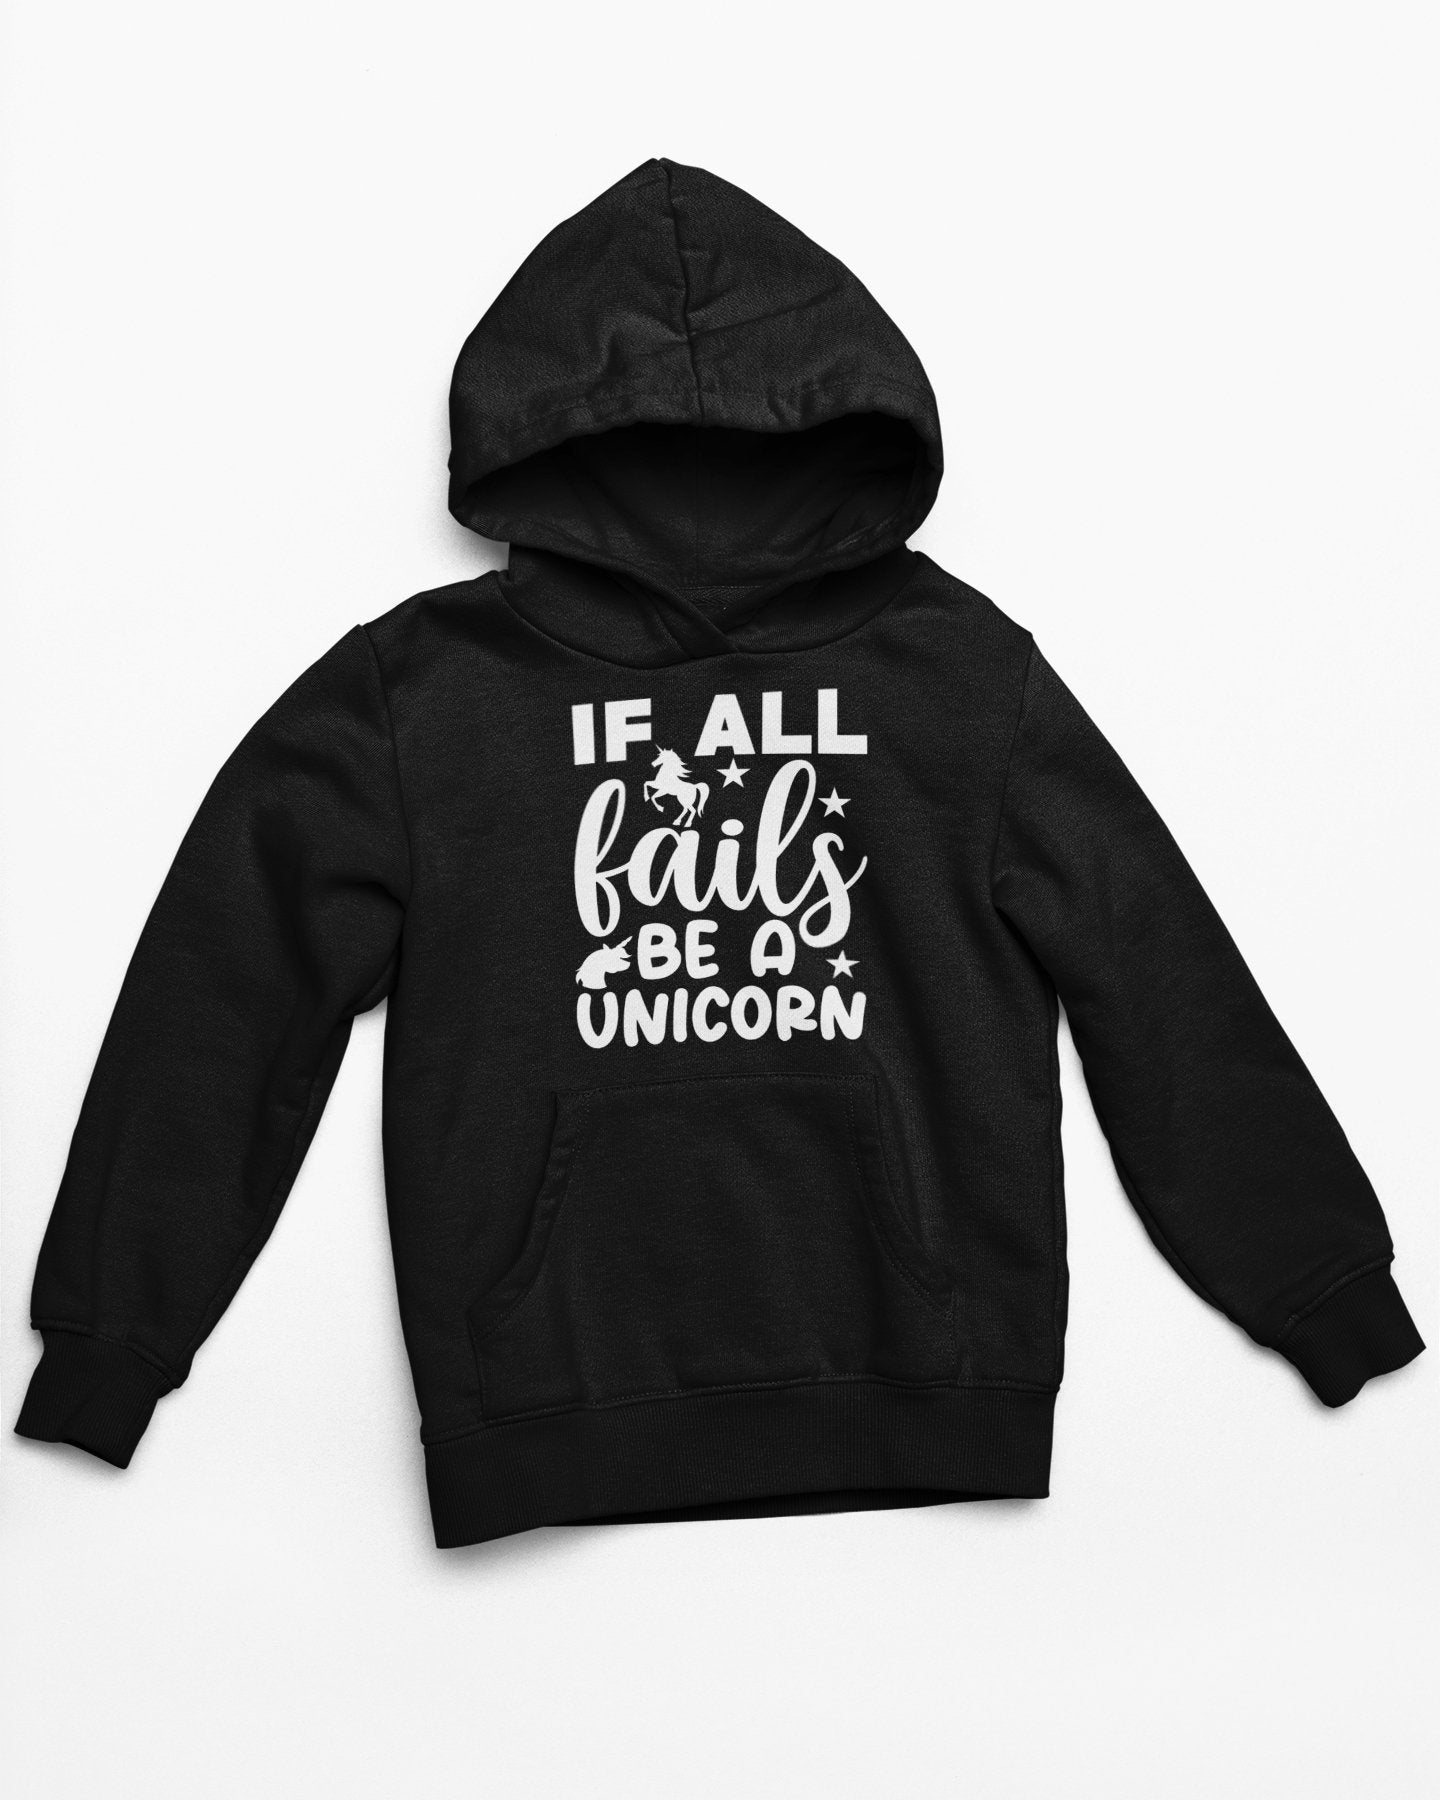 If all fails be a unicorn Hoodie